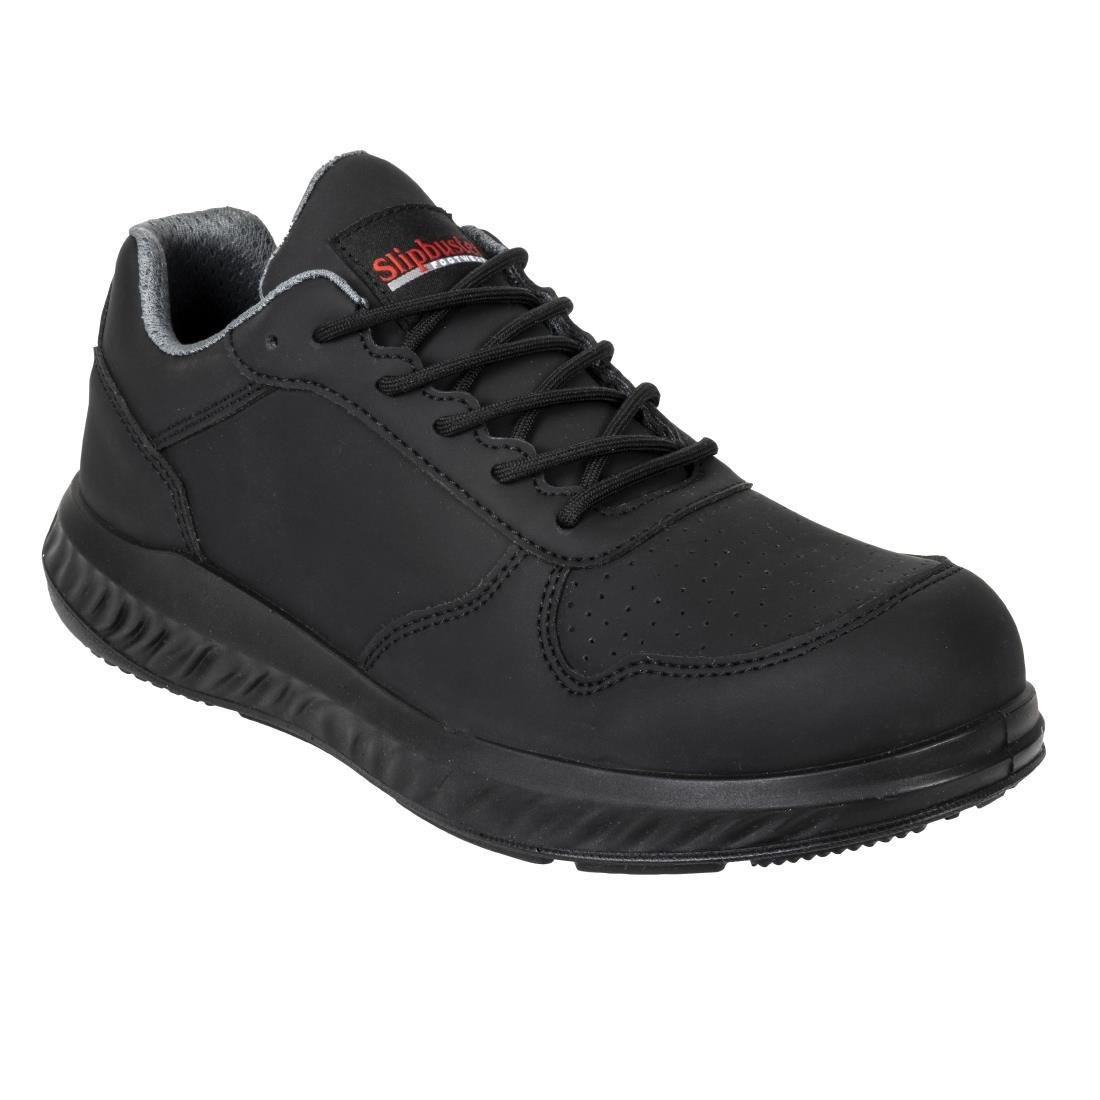 BA063-44 Slipbuster Recycled Microfibre Trainers Matte Black 44 JD Catering Equipment Solutions Ltd